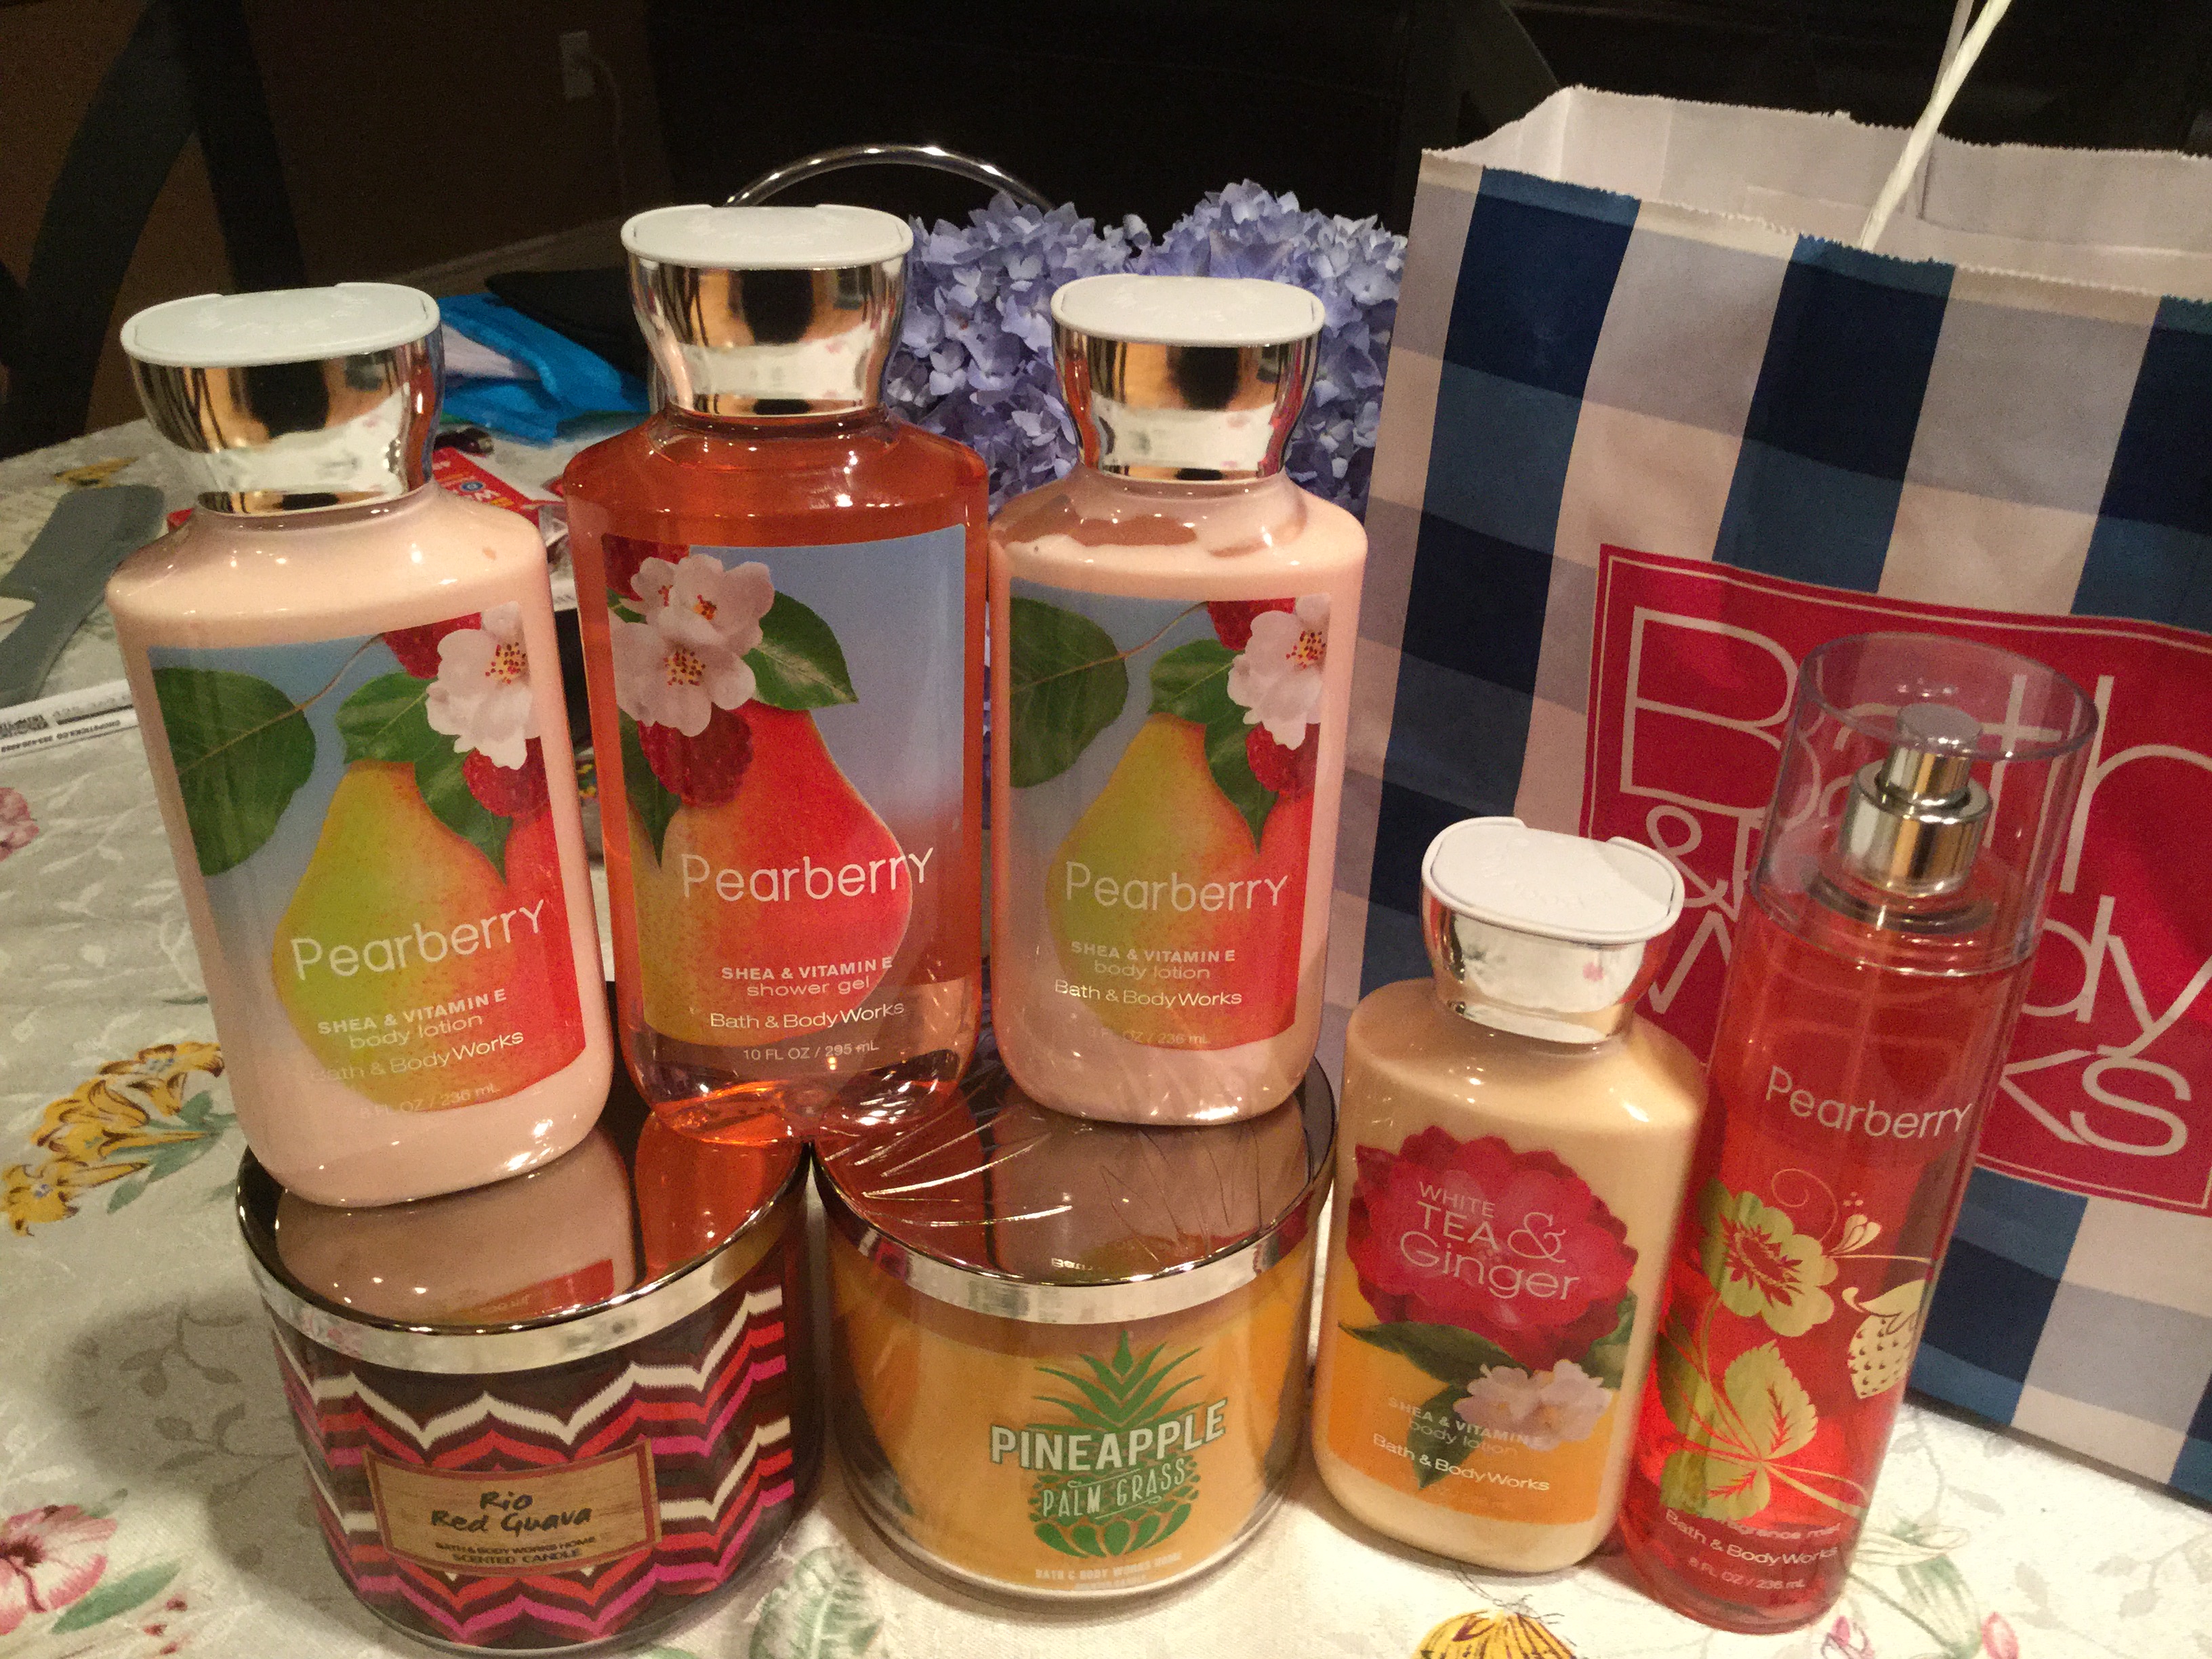 Semi Annual Sale at Bath and Body works